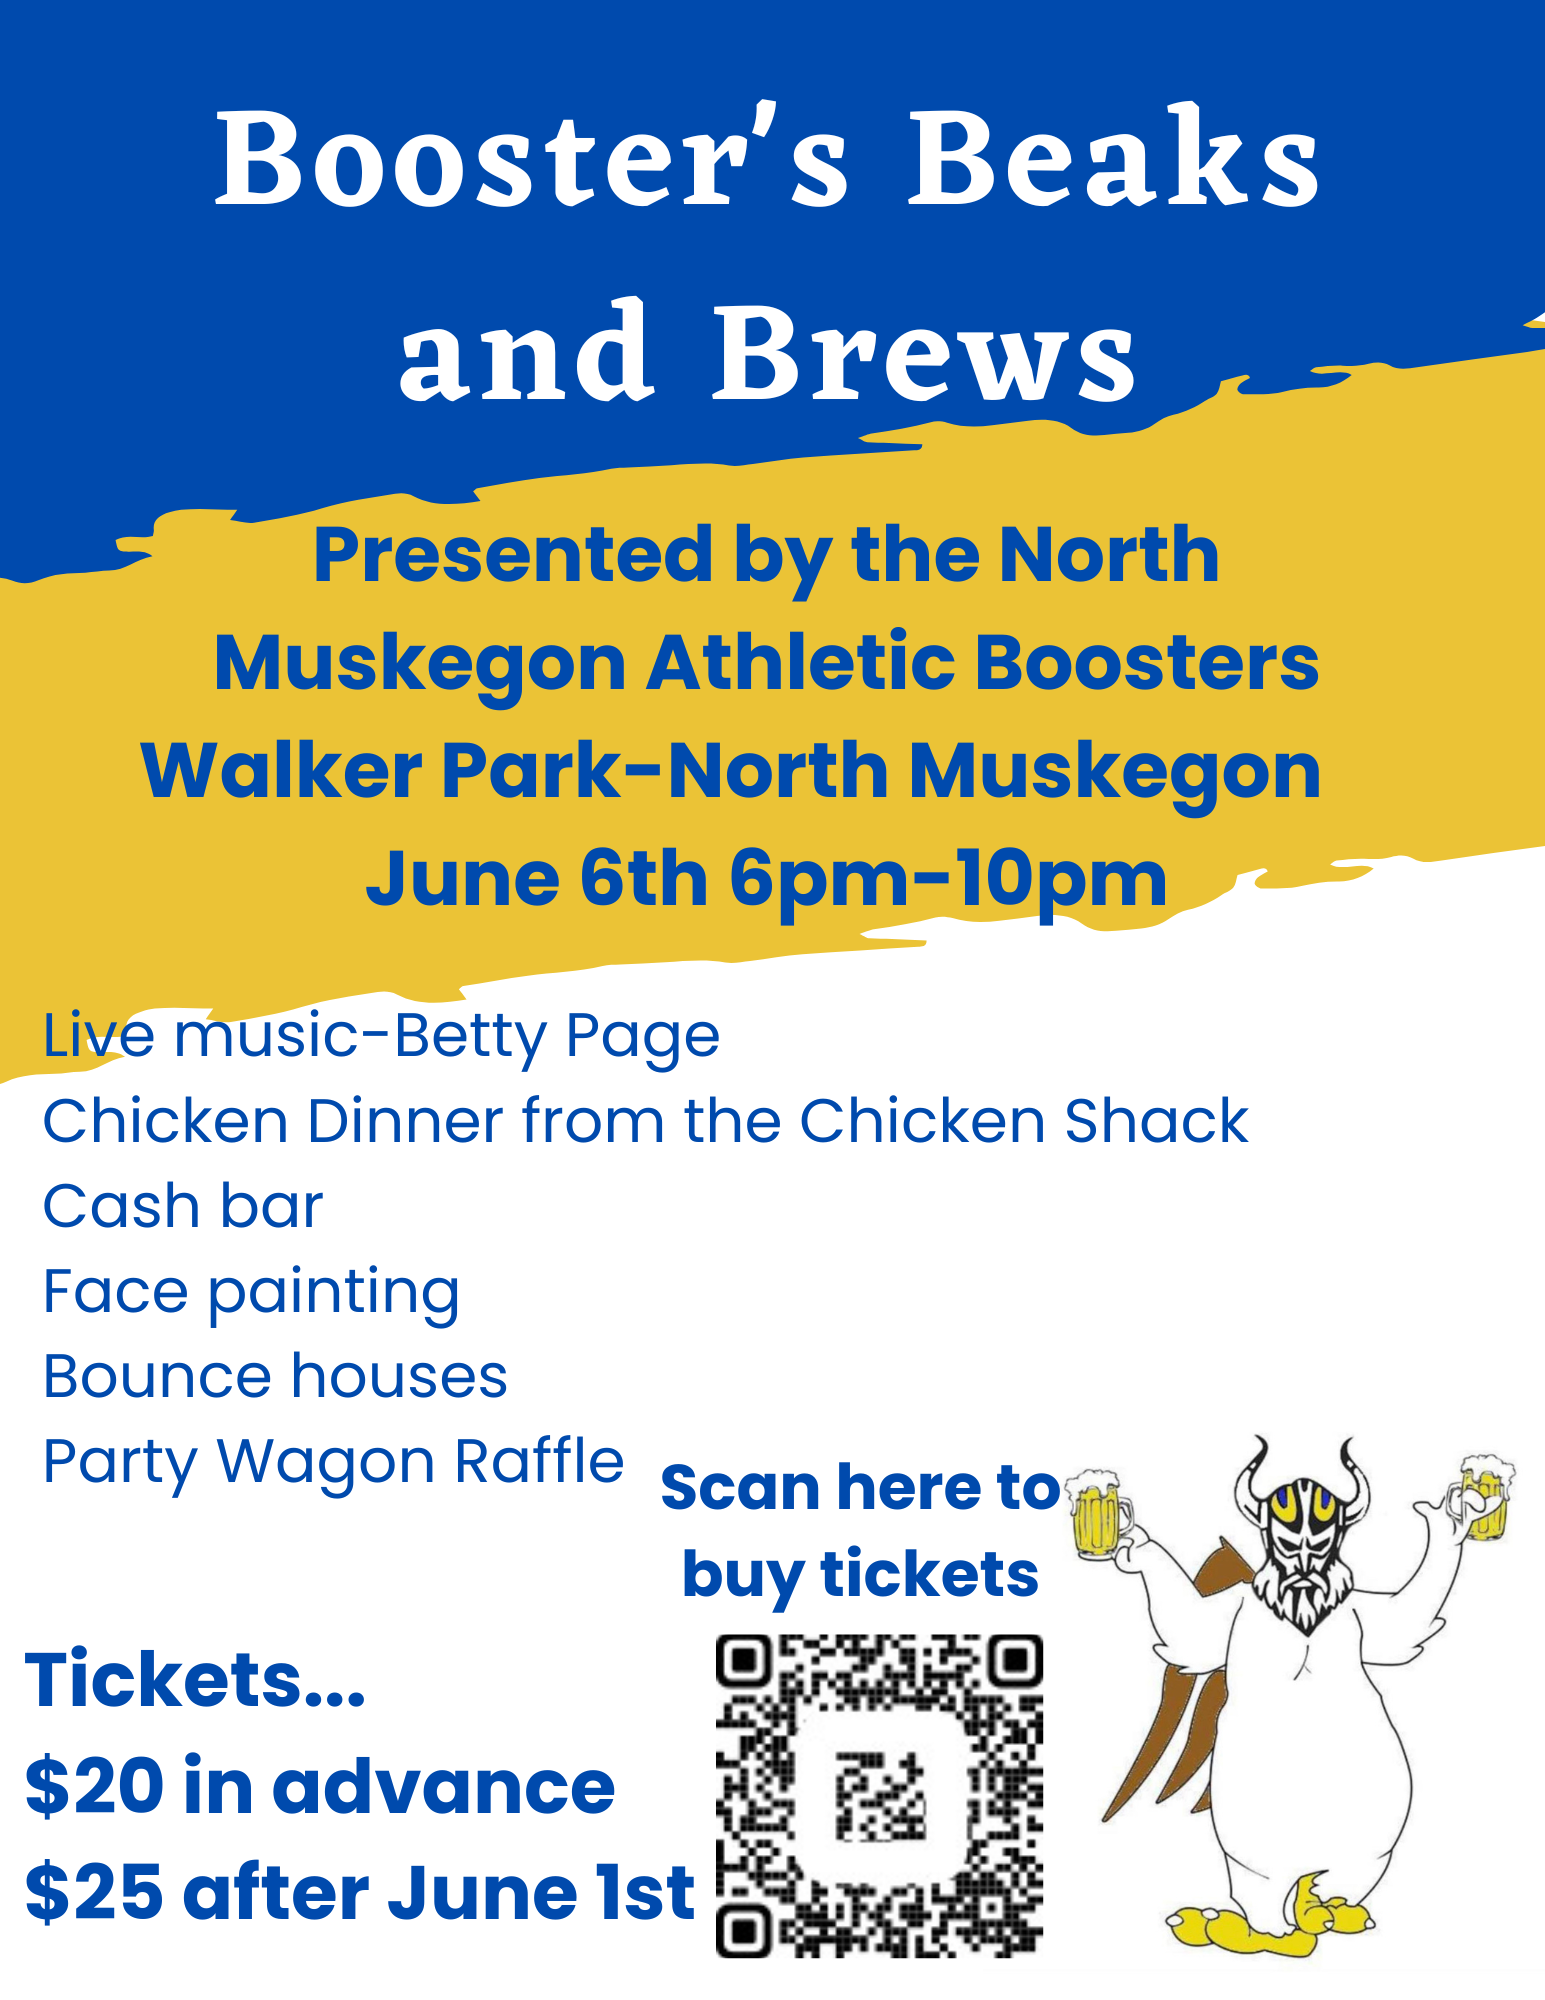 Booster's Beaks and Brews Presented by the North Muskegon Athletic Boosters  Walker Park - North Muskegon  June 6th 6 pm - 10 pm  Tickets $20 in advance  $25 after June 1st